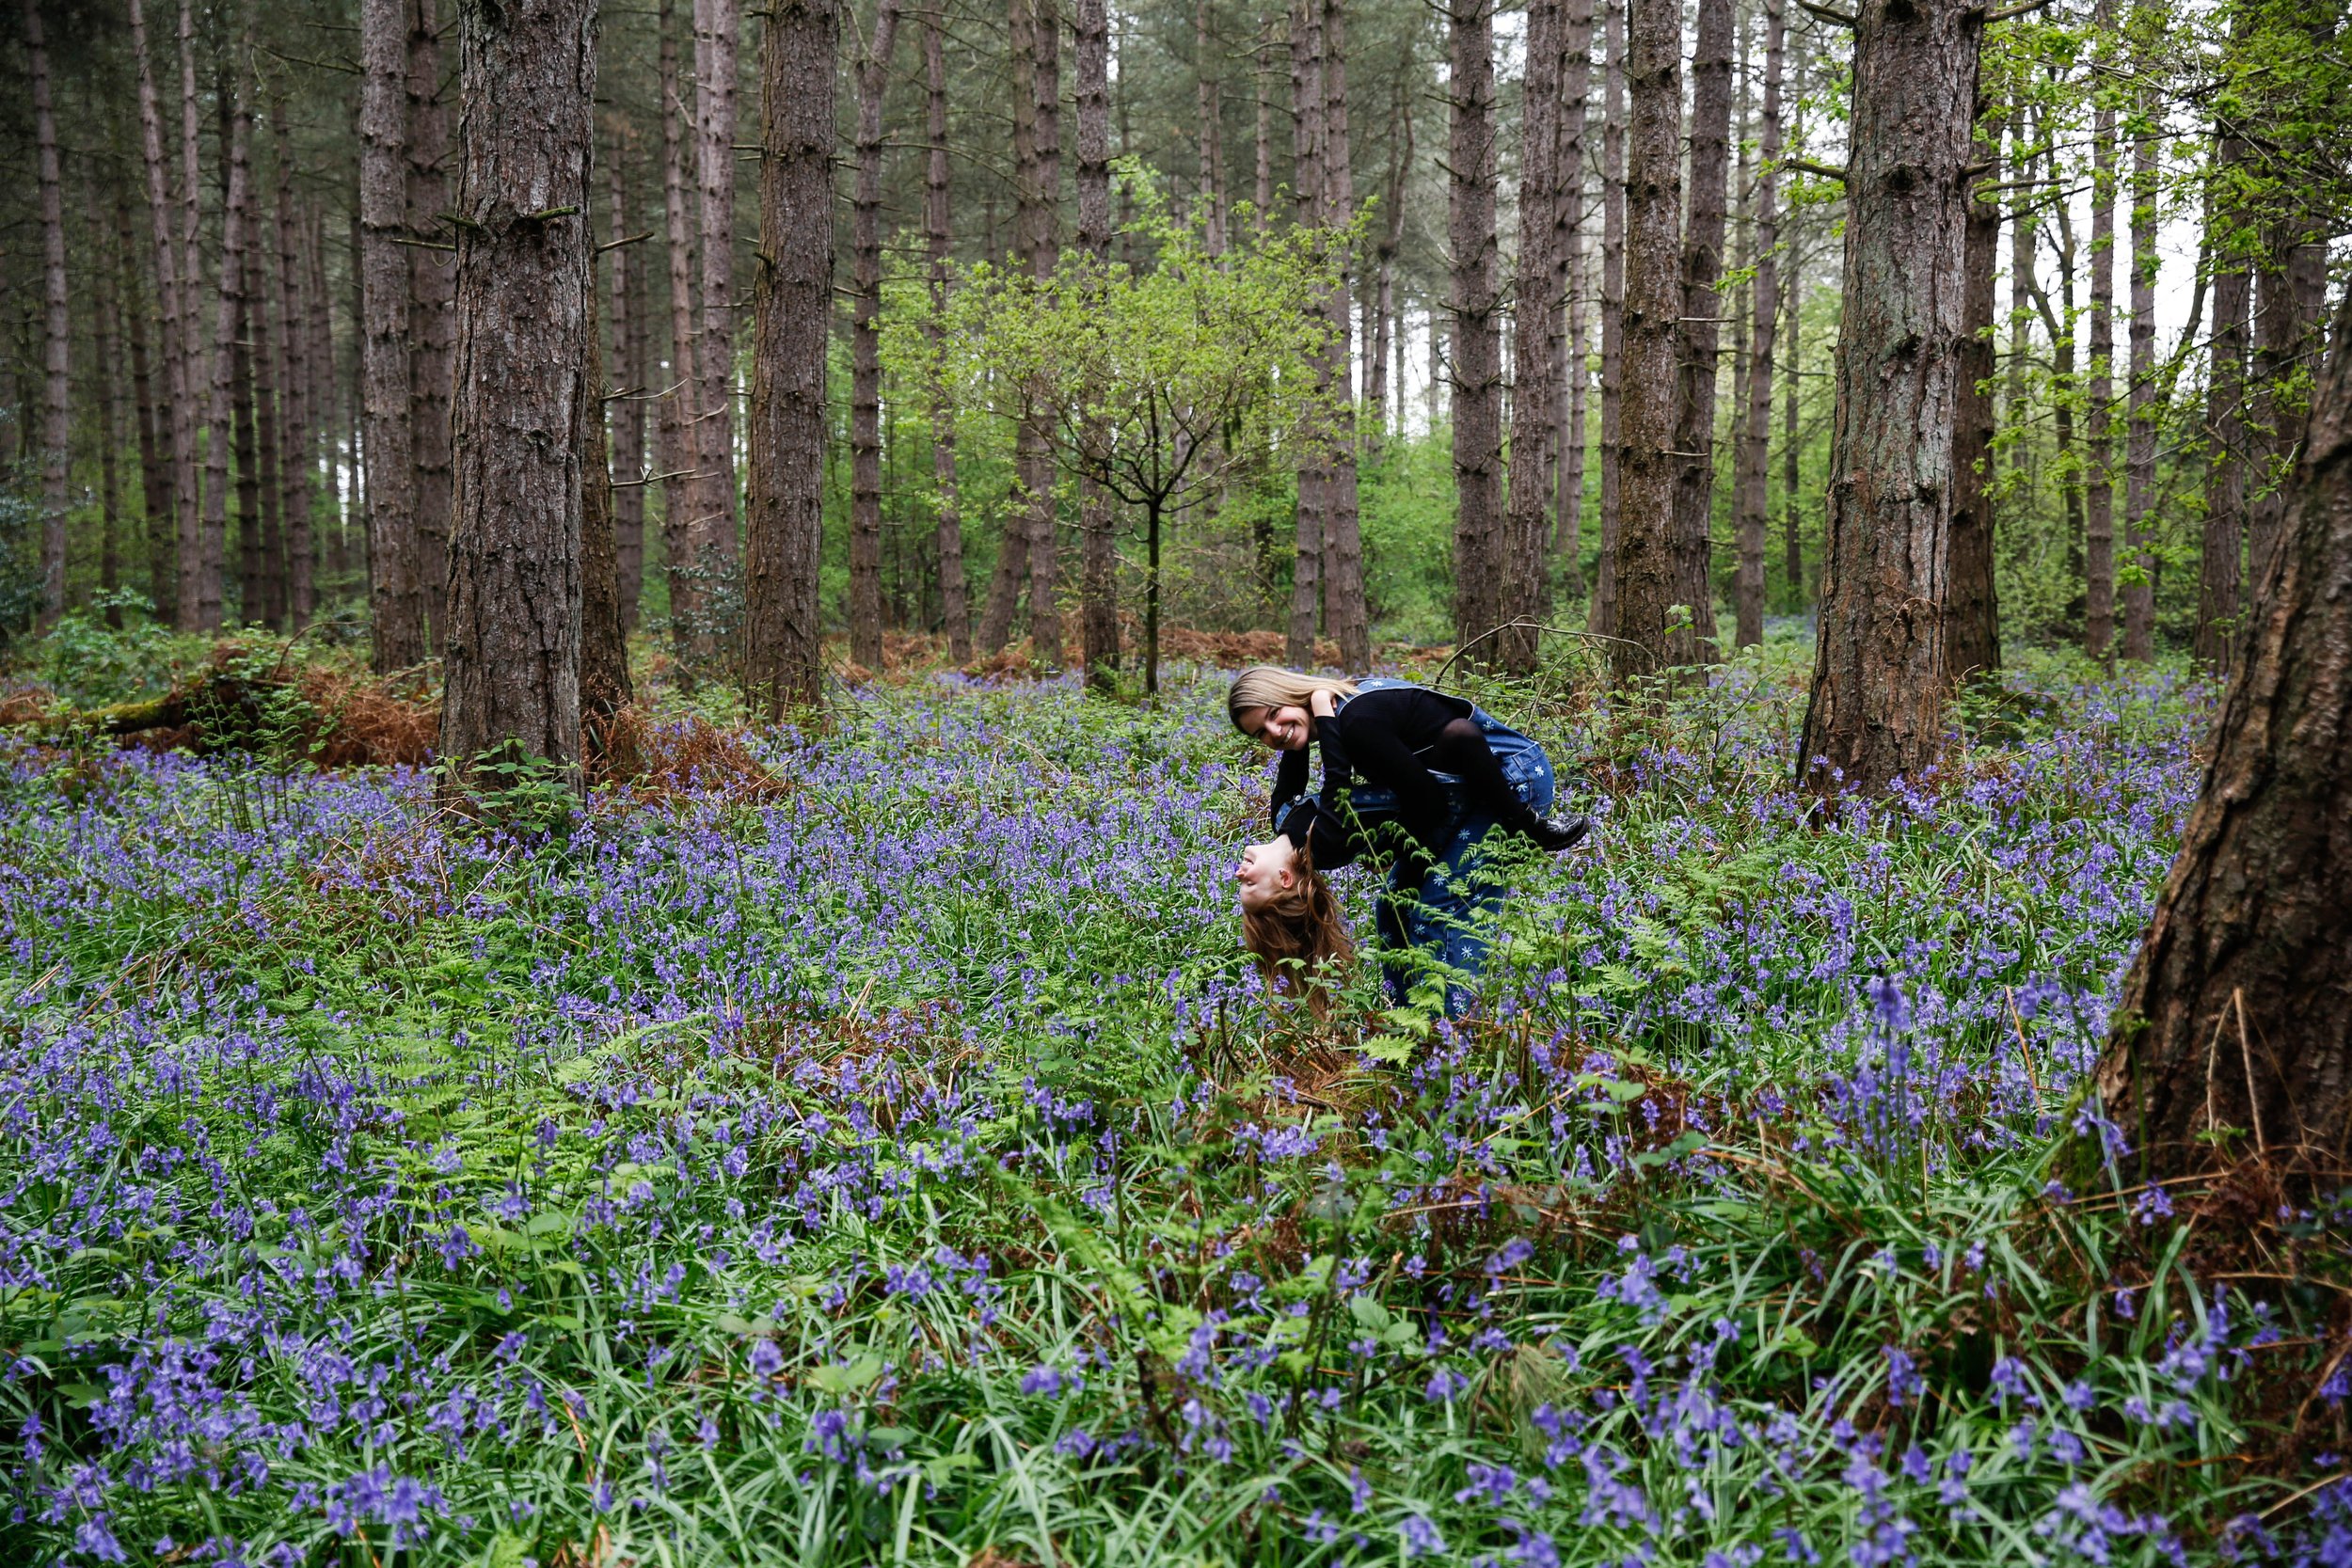 MUM AND DAUGHTER PHOTO SHOOT IN THE BLUEBELLS | BERKSHIRE PORTRAIT SHOOTS03 choice .JPG